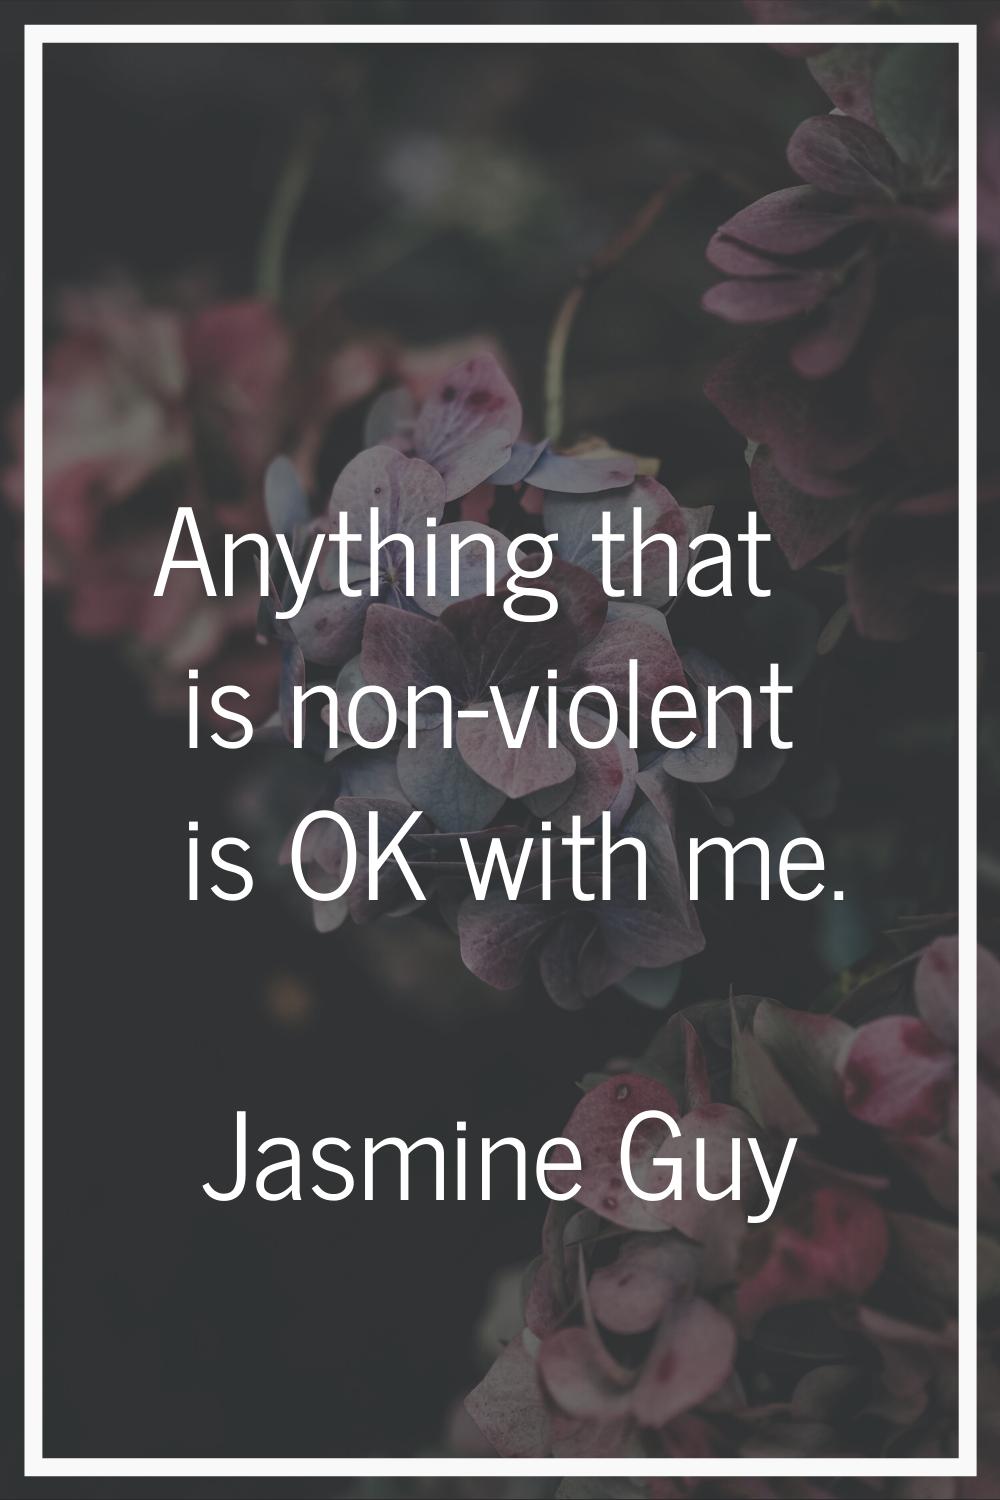 Anything that is non-violent is OK with me.